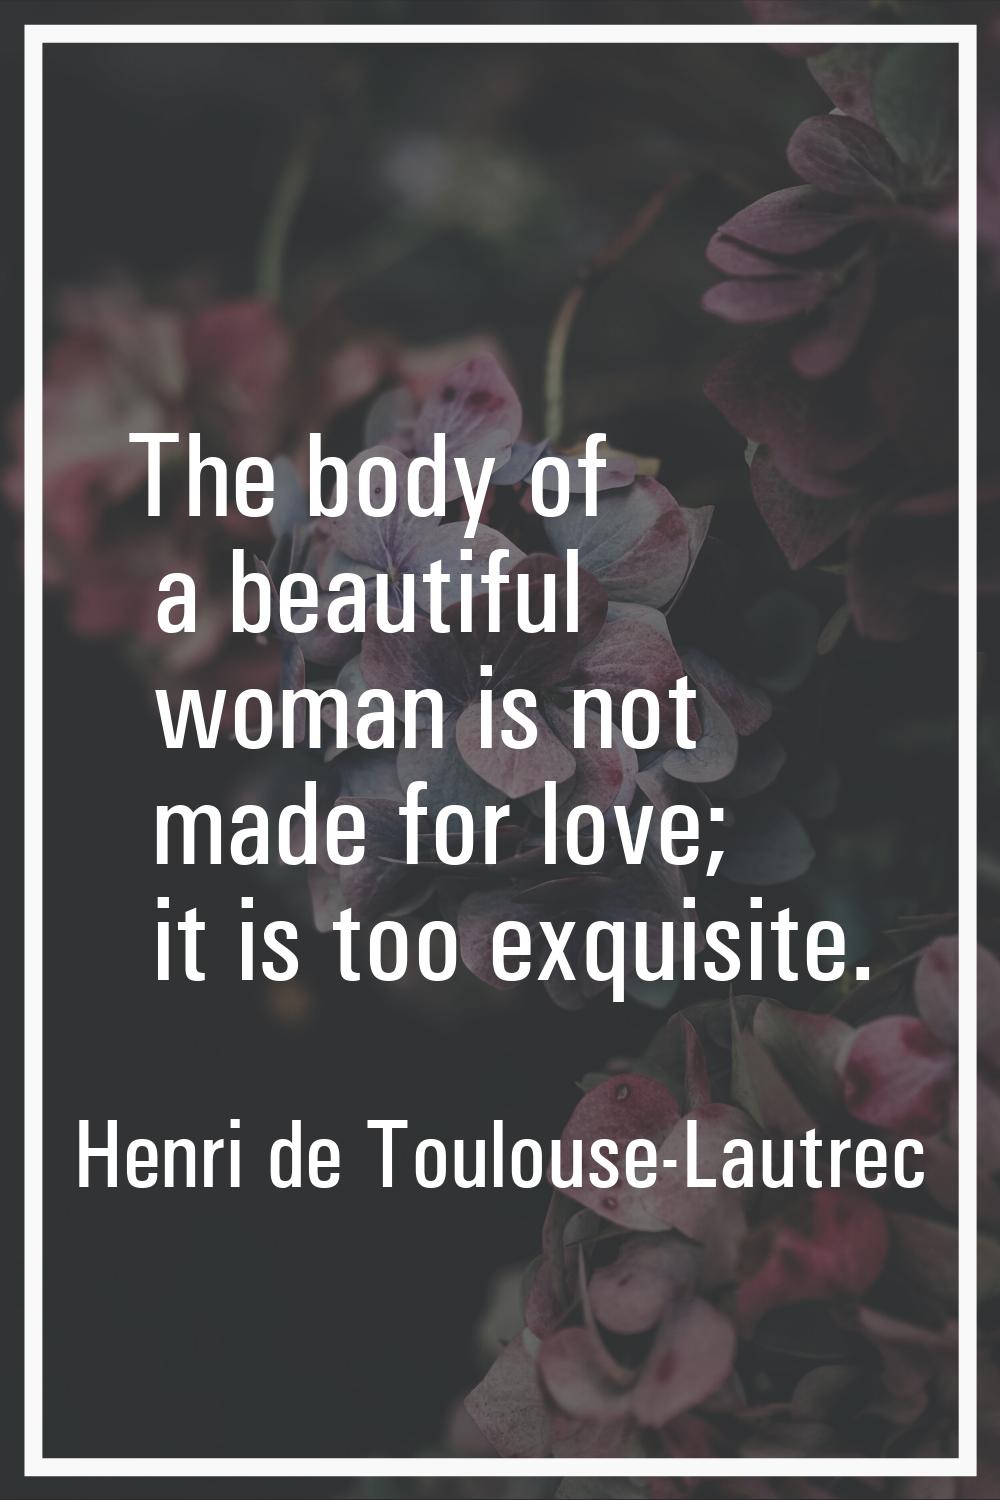 The body of a beautiful woman is not made for love; it is too exquisite.